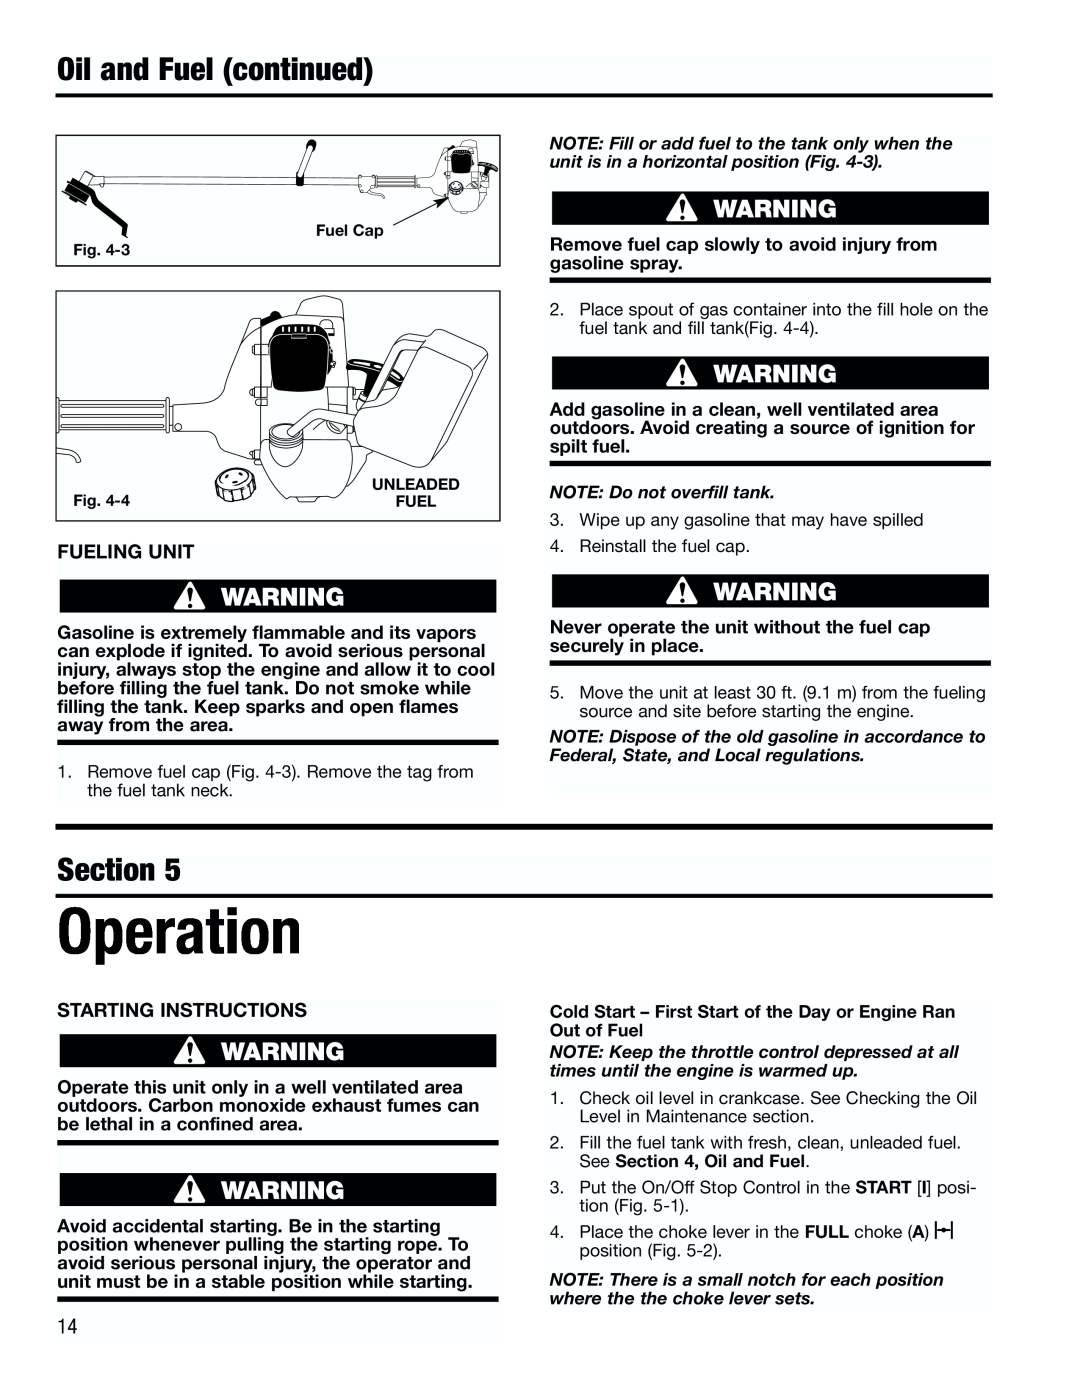 Troy-Bilt TB4000 manual Operation, Oil and Fuel continued, Fueling Unit, Starting Instructions, Section 